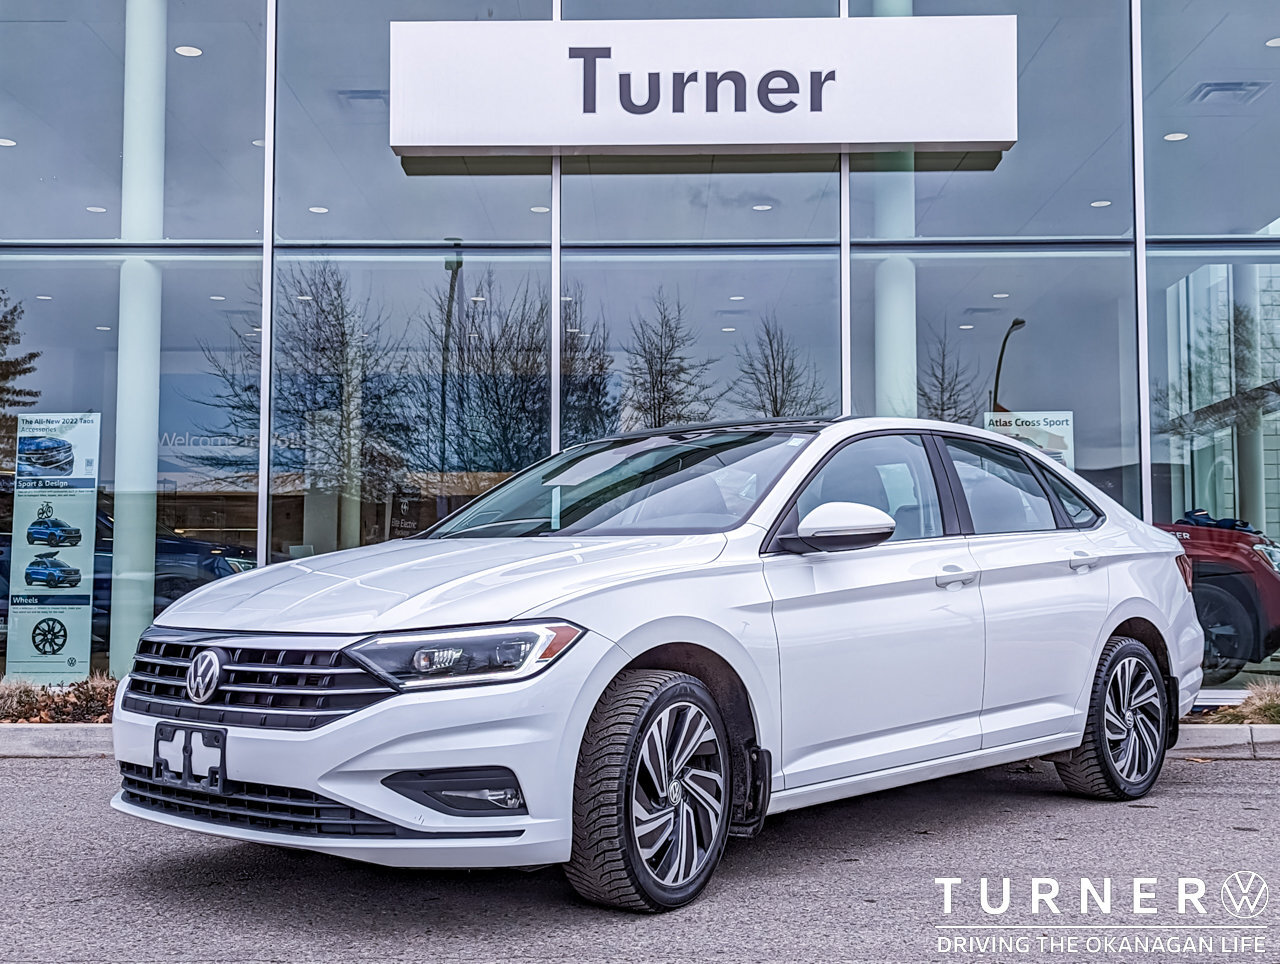 2019 Volkswagen Jetta EXECLINE 1.4T 8-SPEED AUTOMATIC Receive a $250 Gas